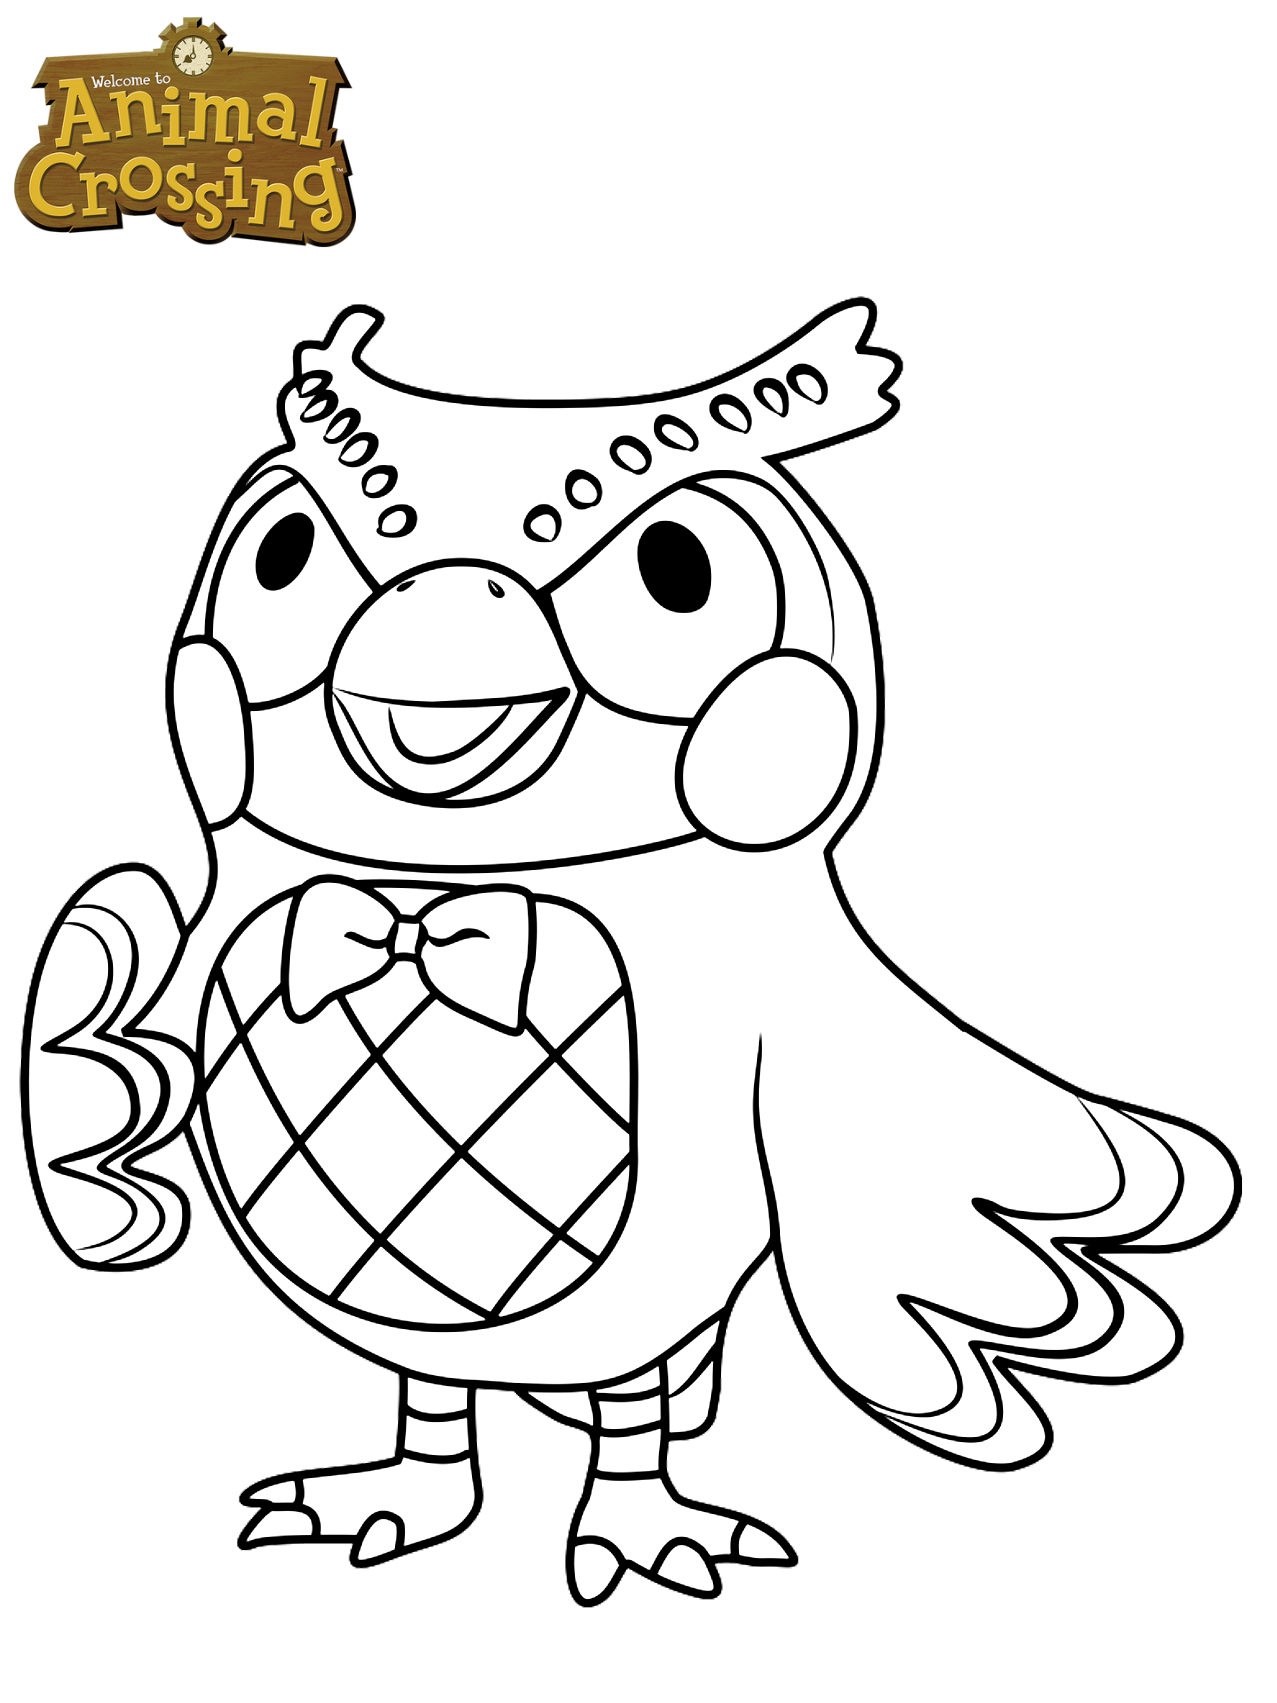 Animal Crossing Coloring Pages - Free Animal Crossing Coloring Pages